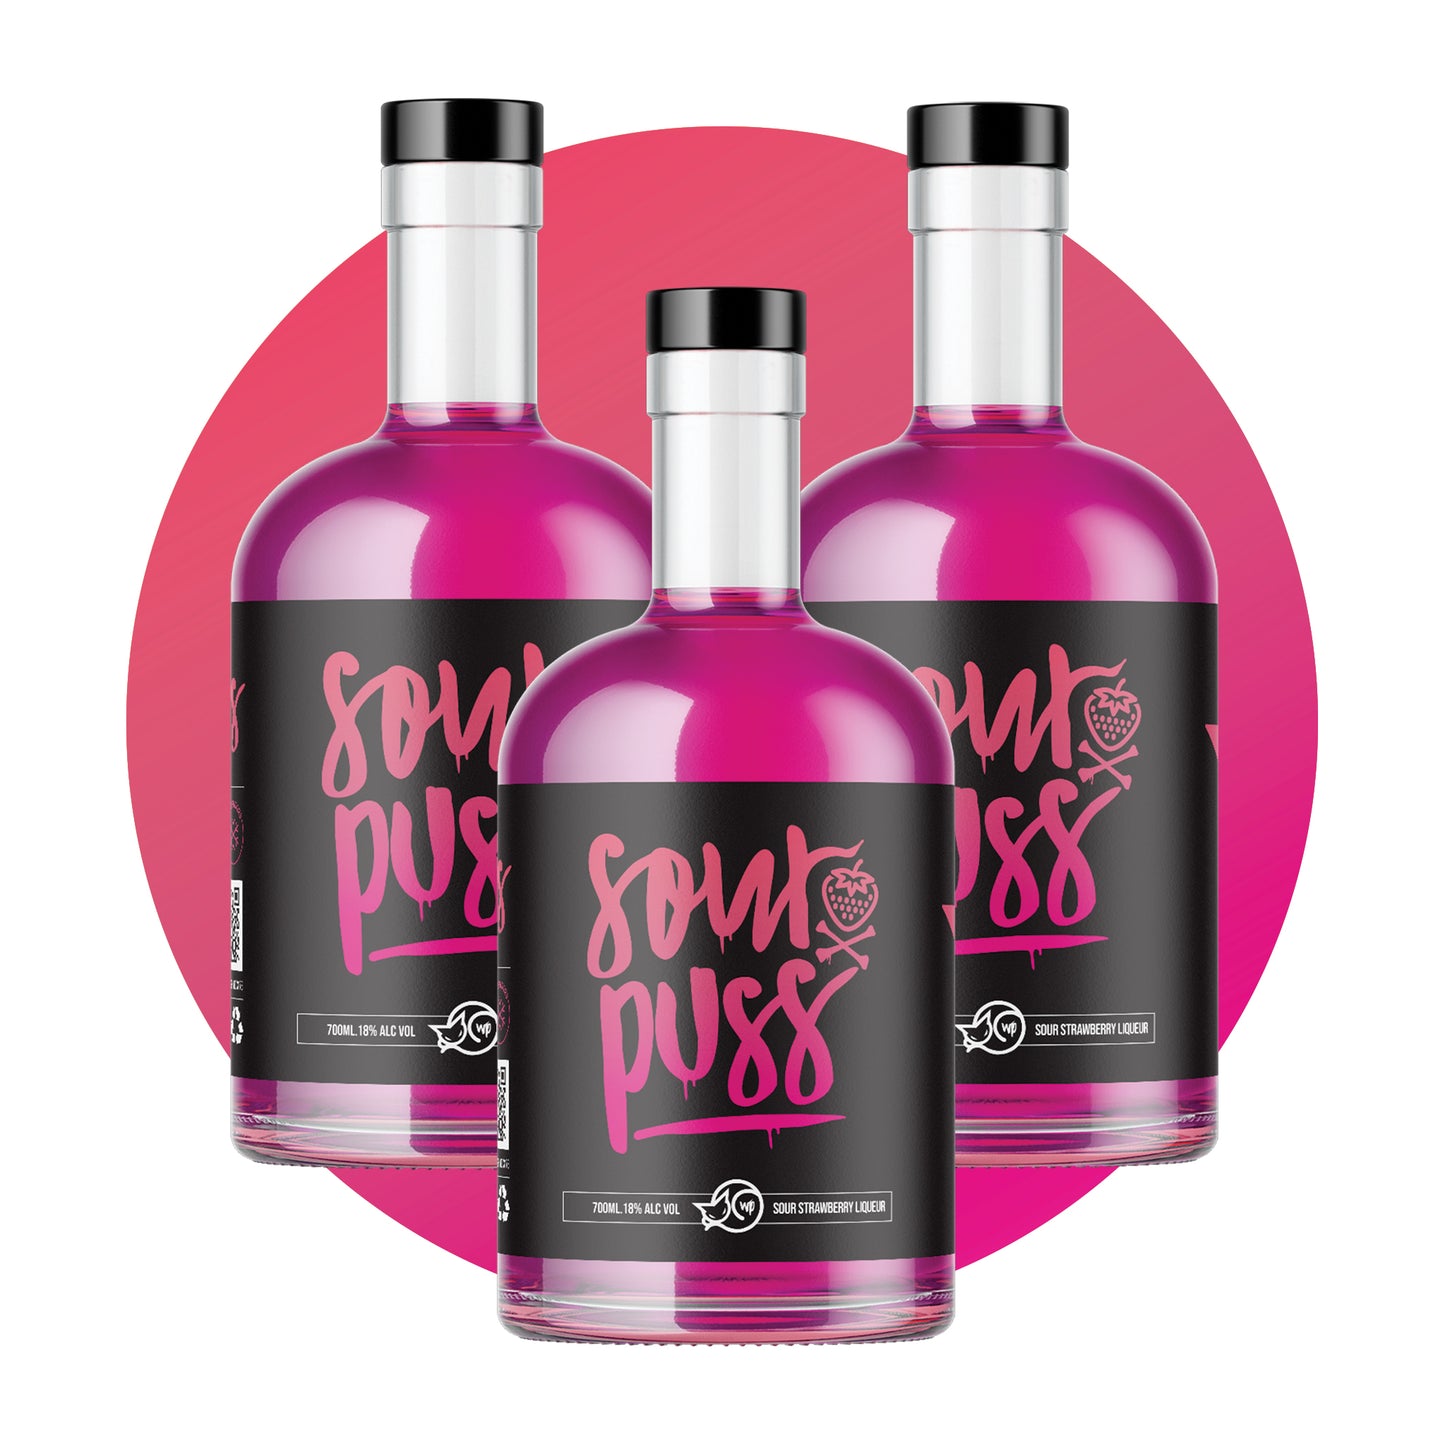 Sour Puss Strawberry 3-Pack 700ml - 80Proof 